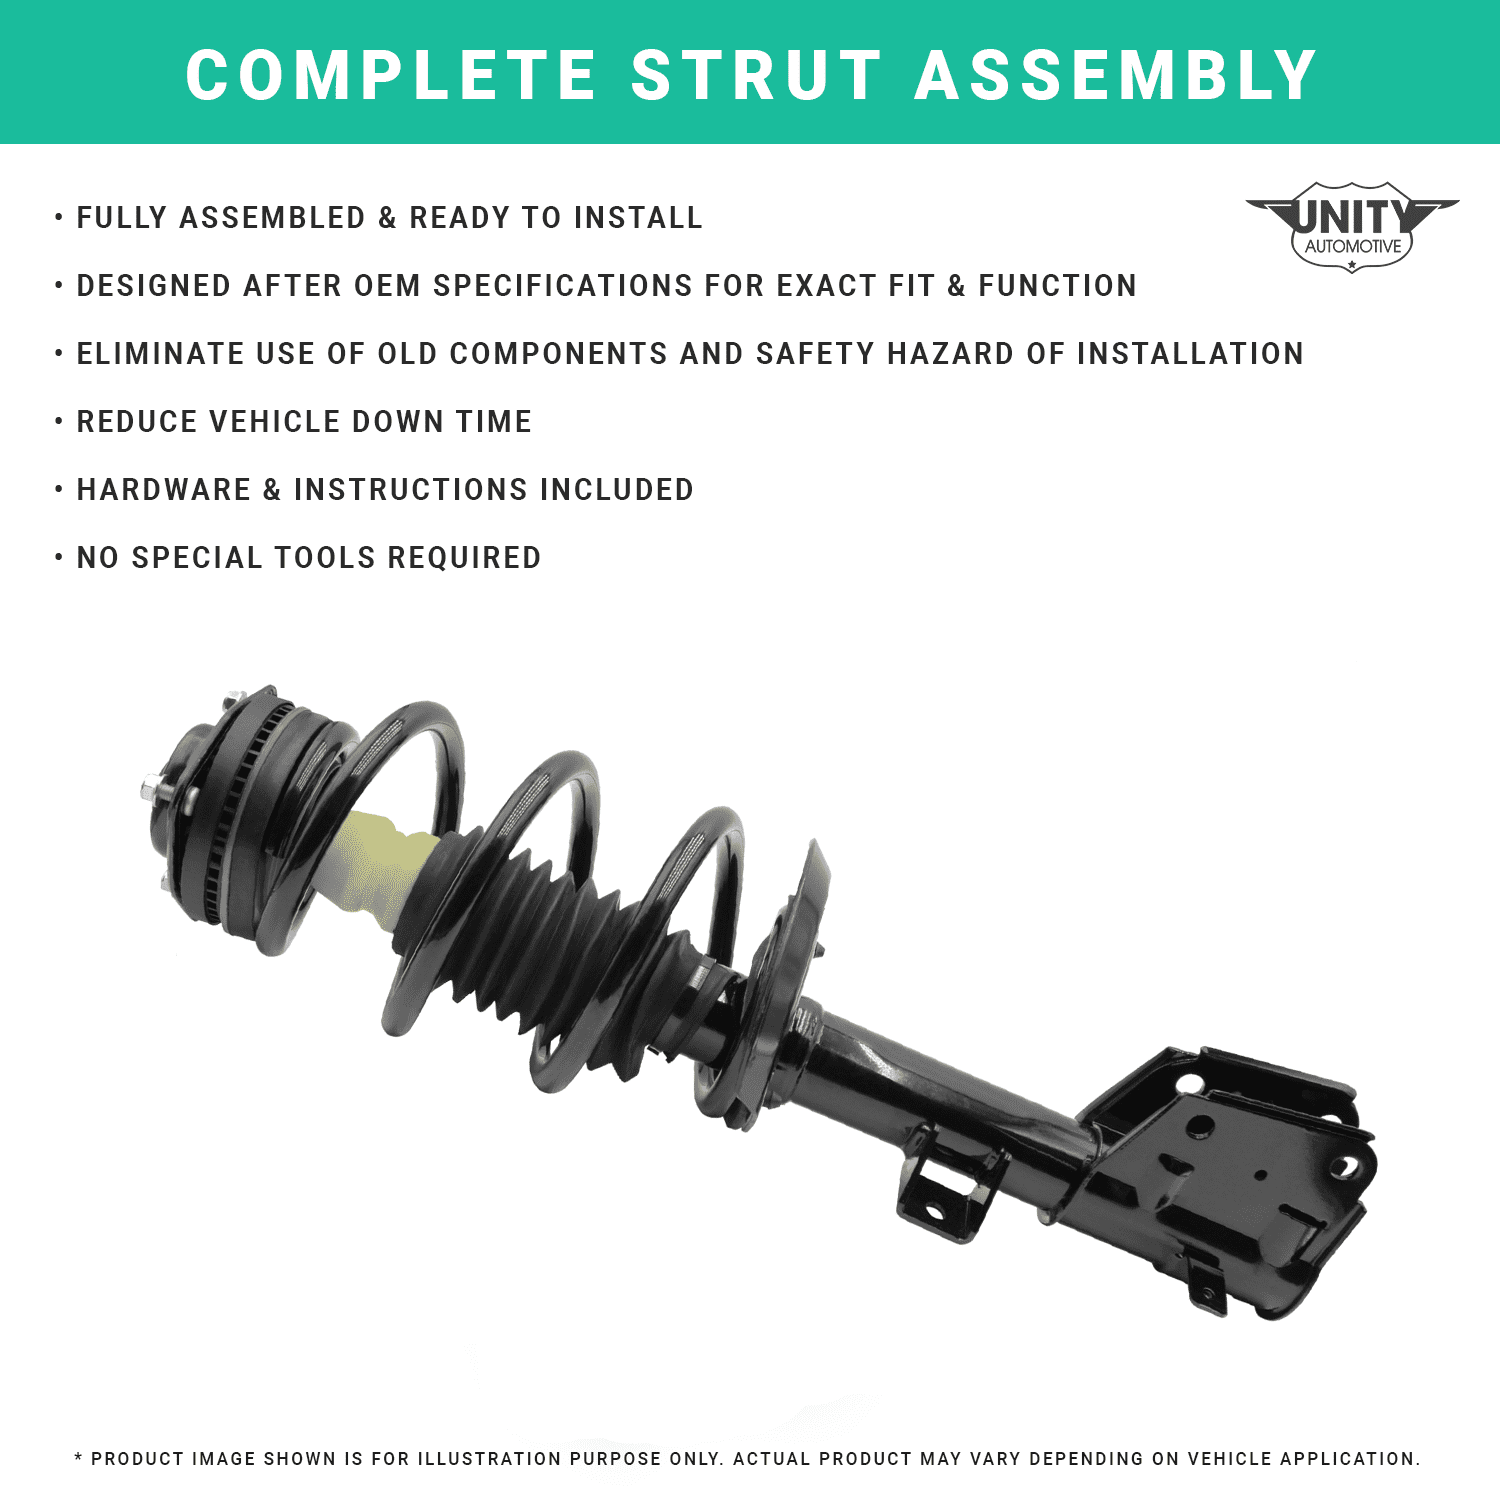 Unity Automotive Front & Rear Complete Strut Assembly Kit Fits 1996-2007  Ford Taurus, 4-11010-15040-001